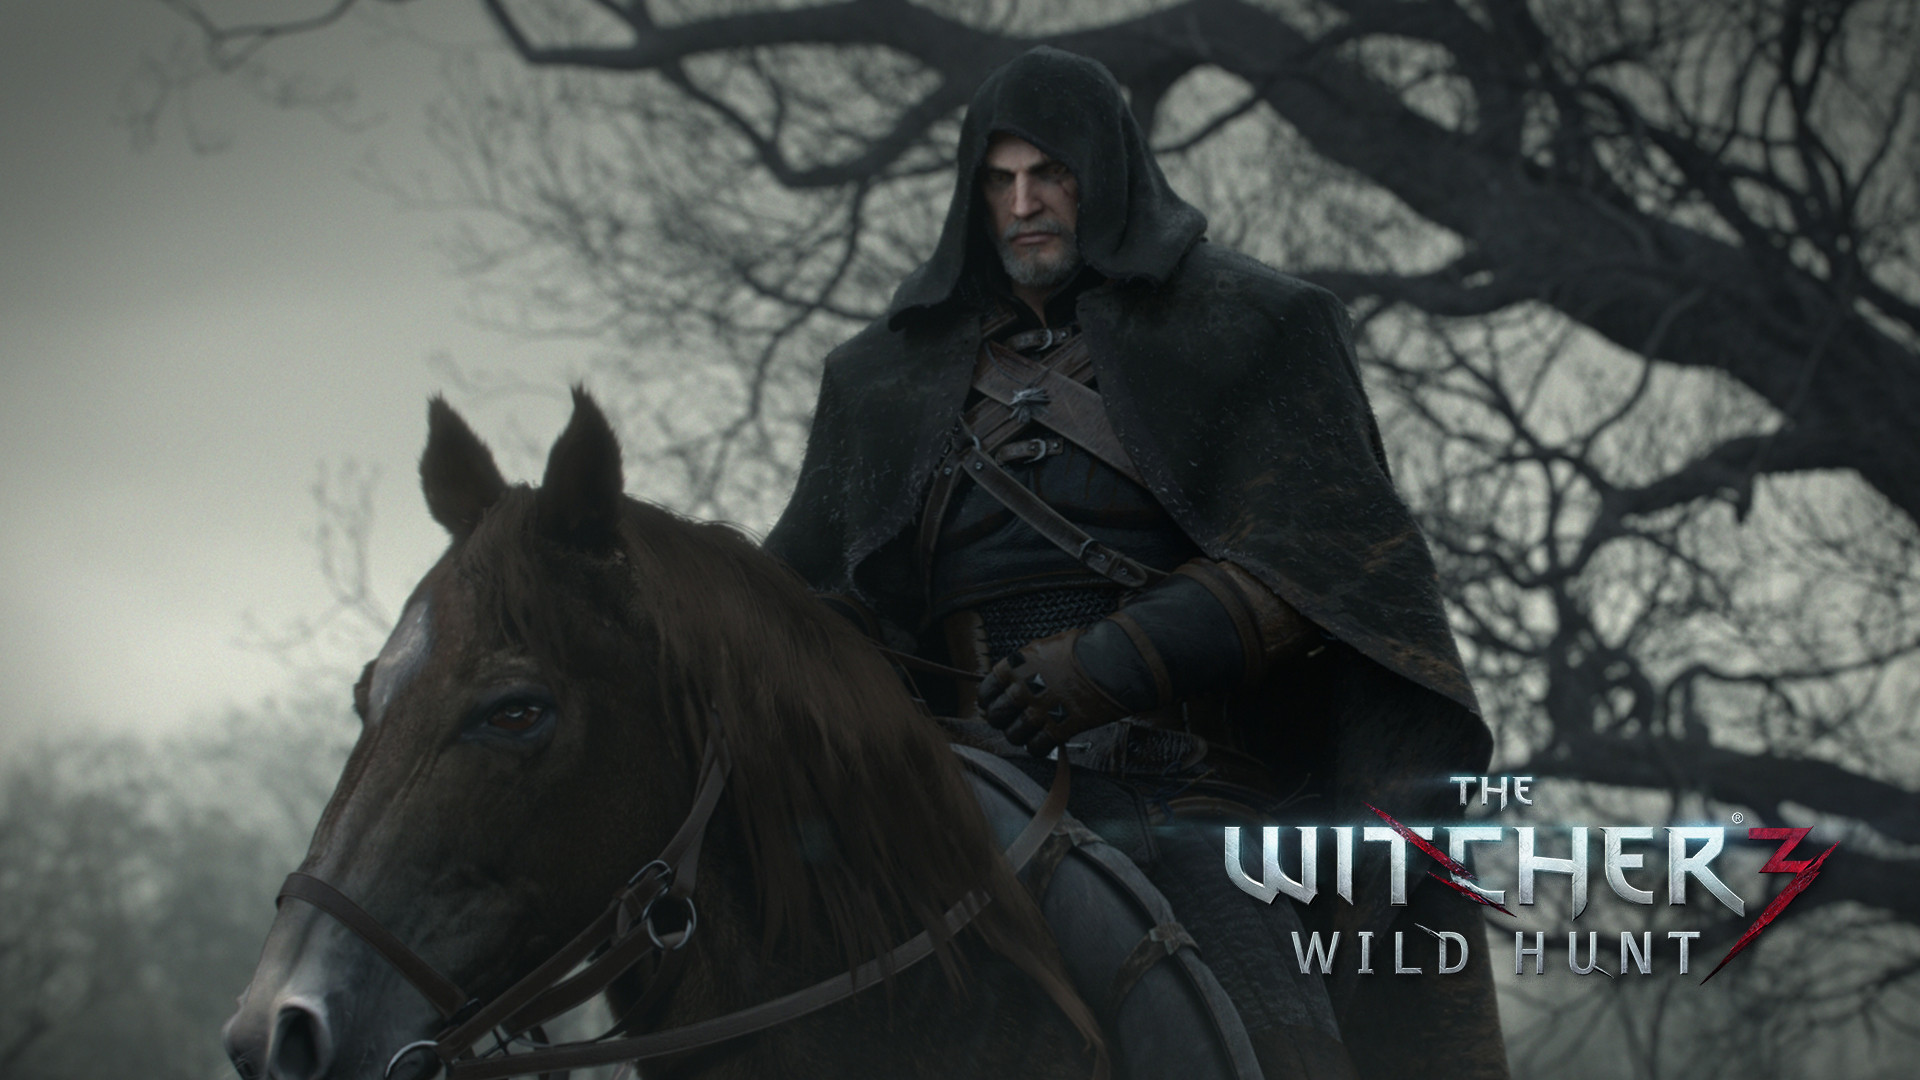 the witcher 3: wild hunt, video game, geralt of rivia, the witcher